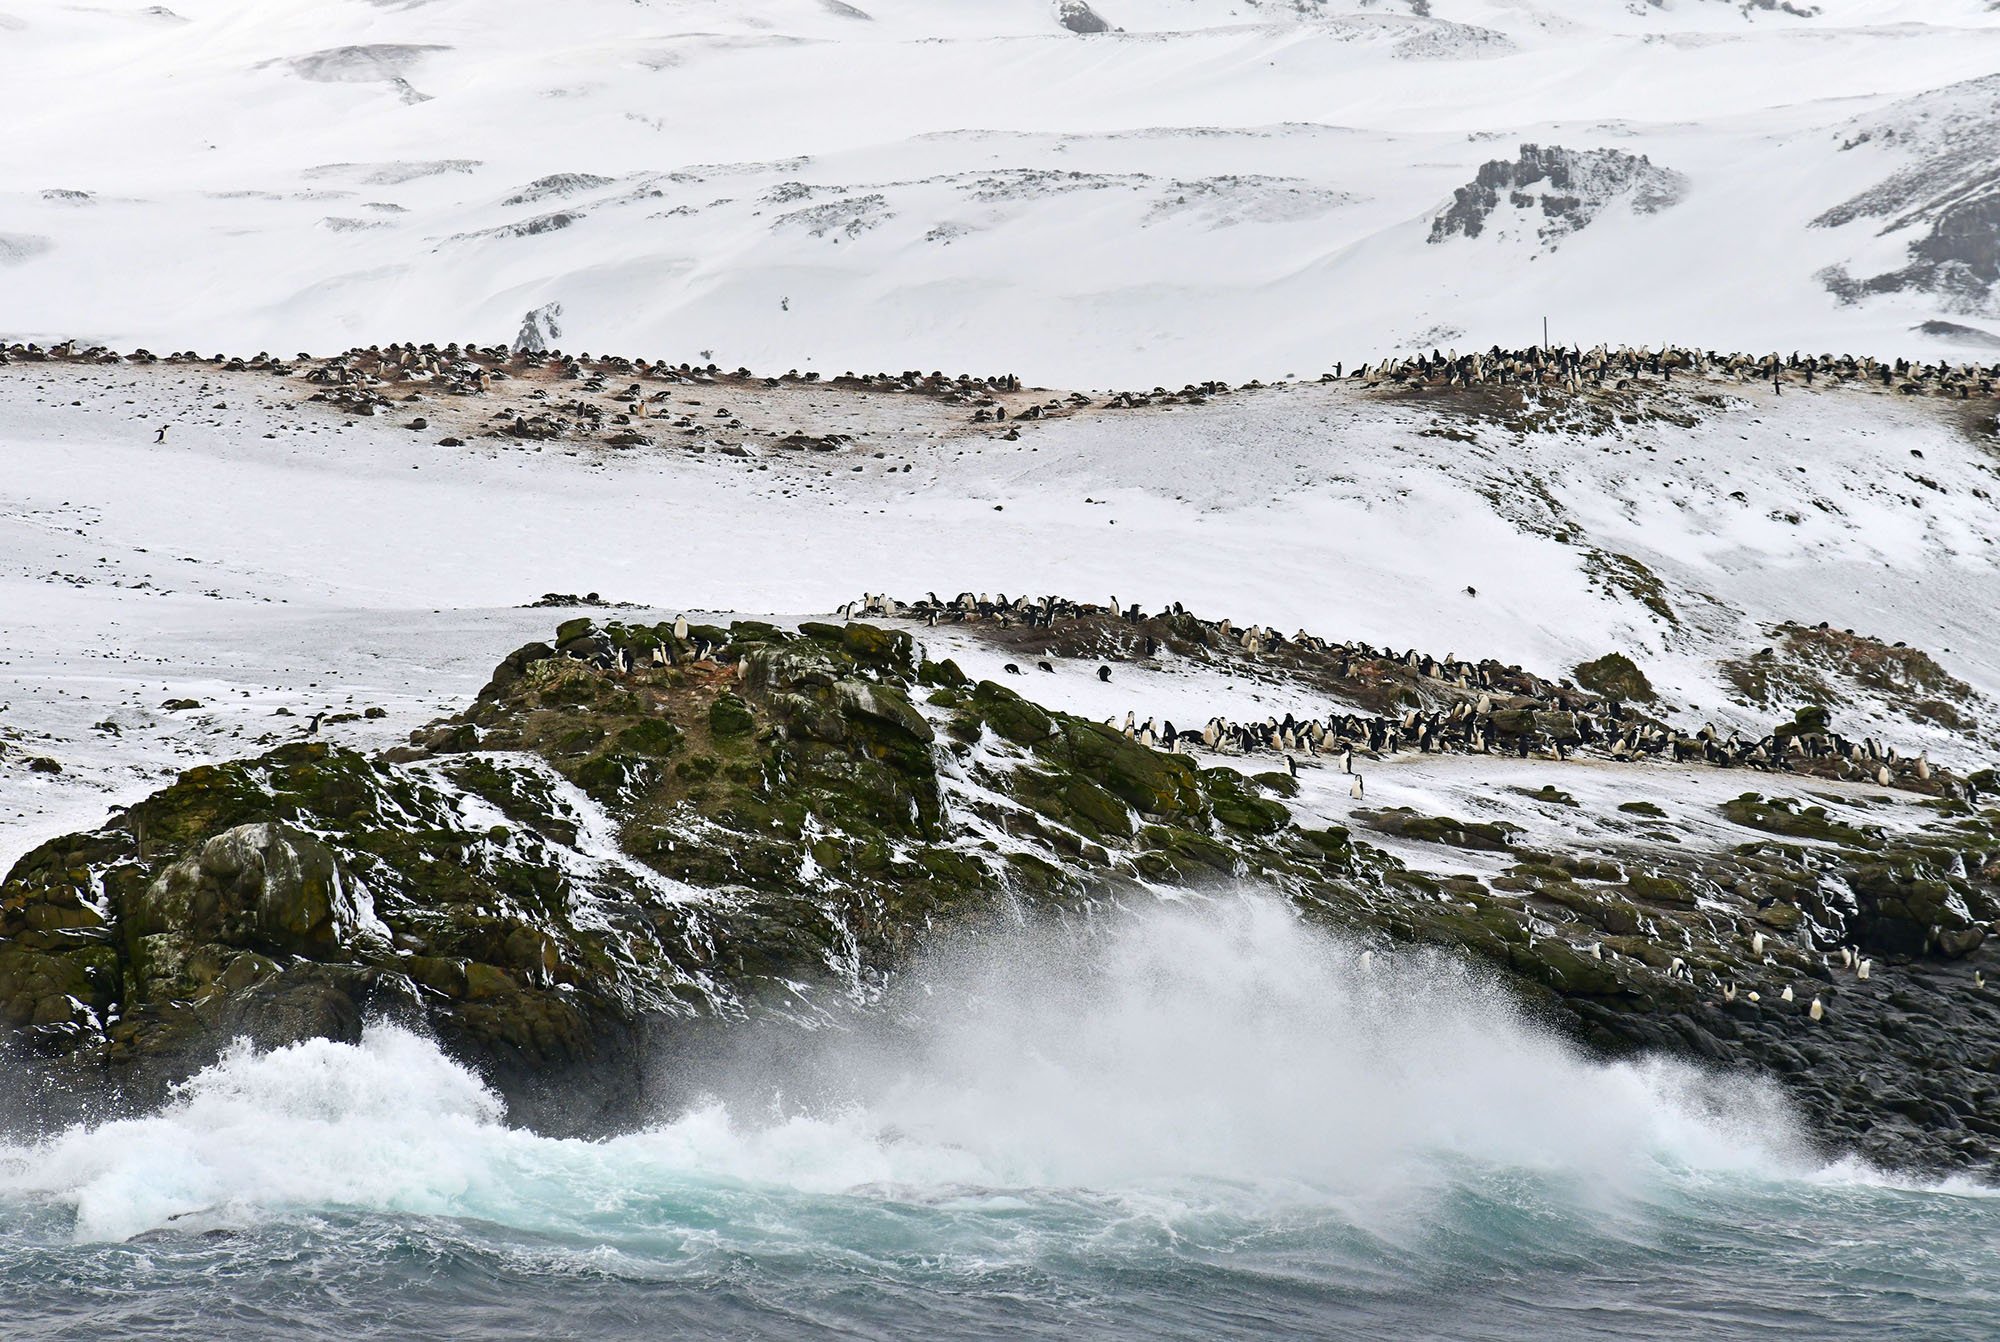 penguins on rock with waves